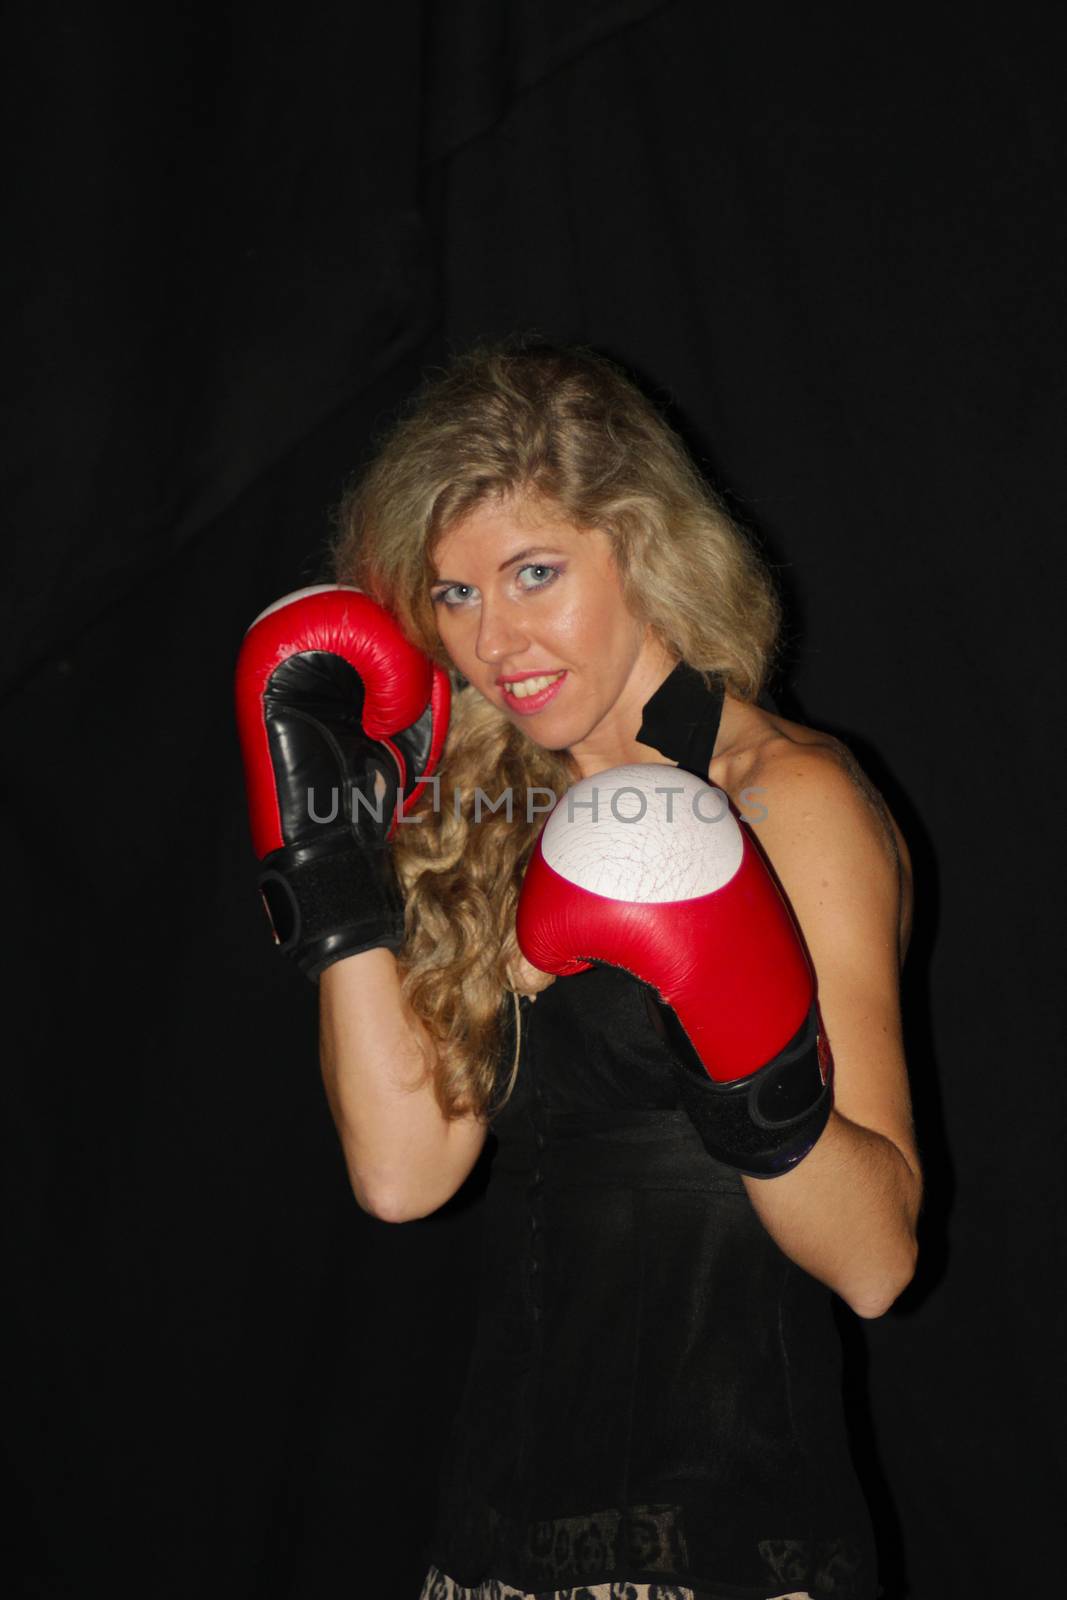 funny blonde girl in black casual dress in red boxing gloves